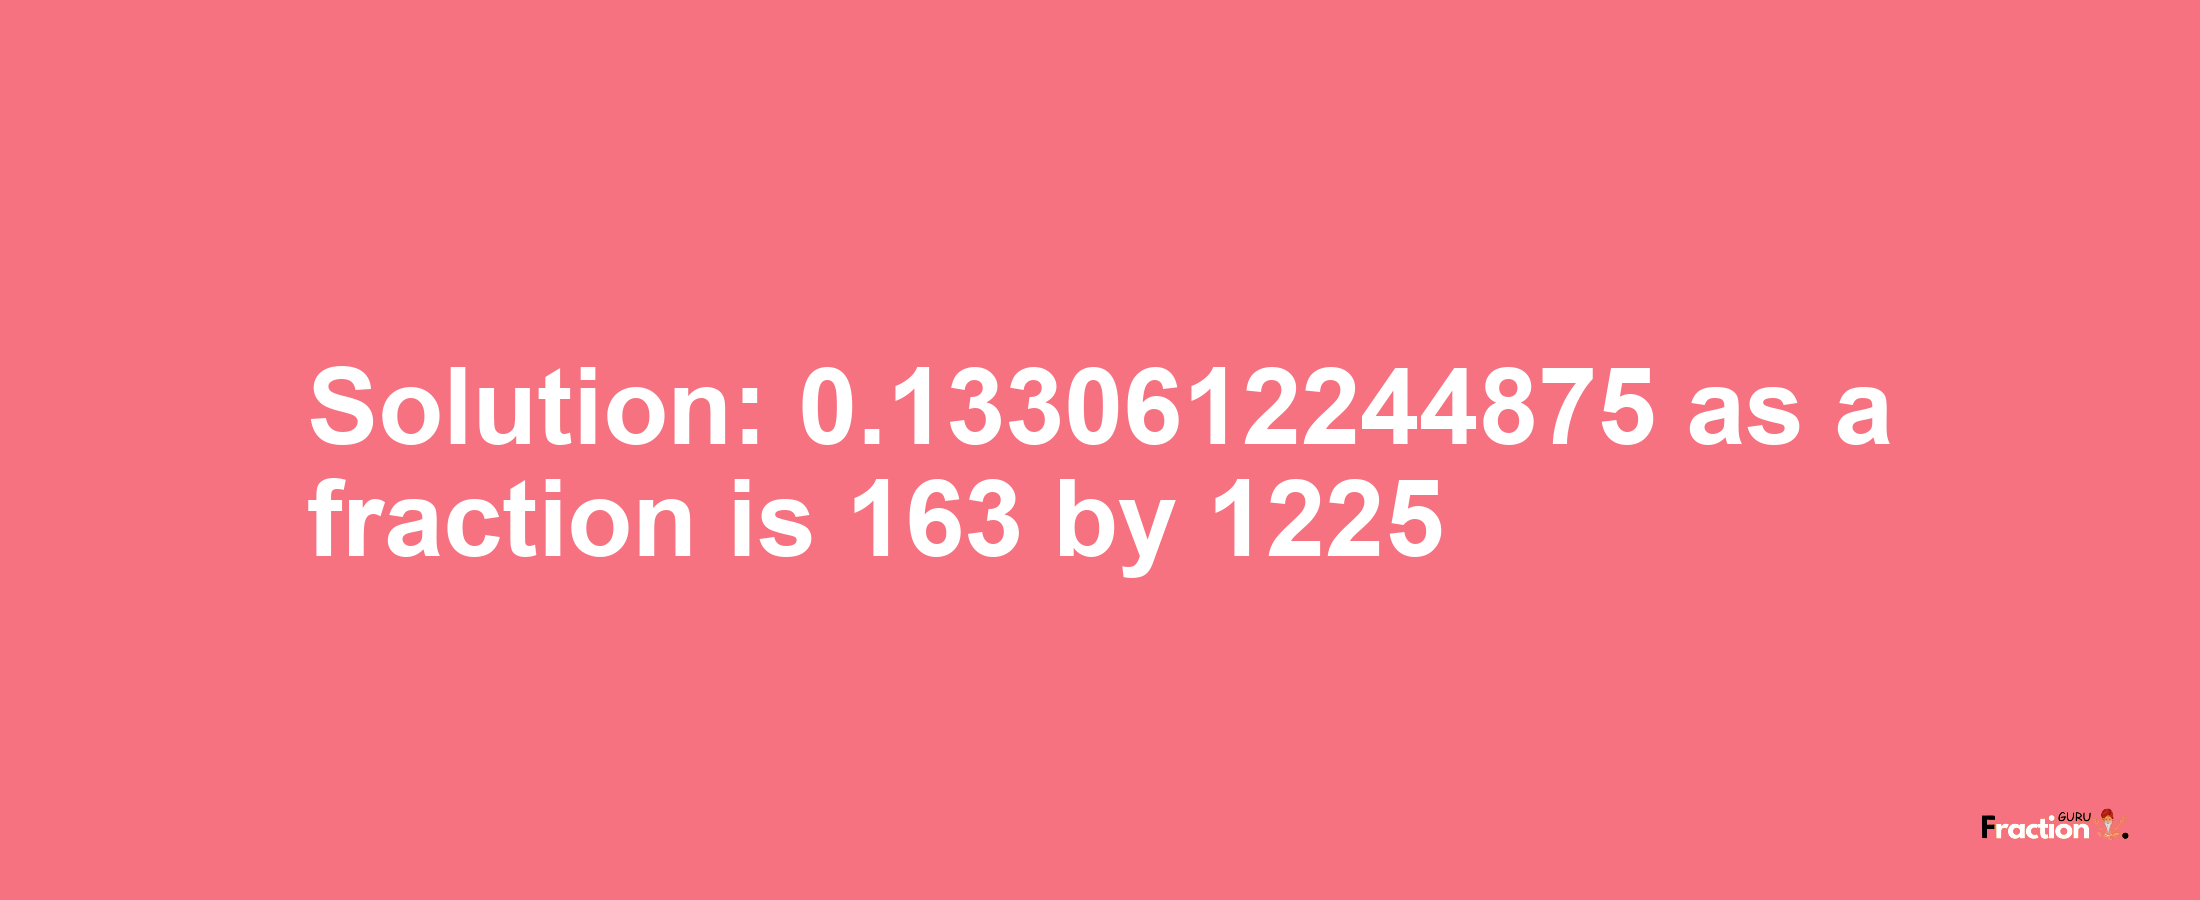 Solution:0.1330612244875 as a fraction is 163/1225